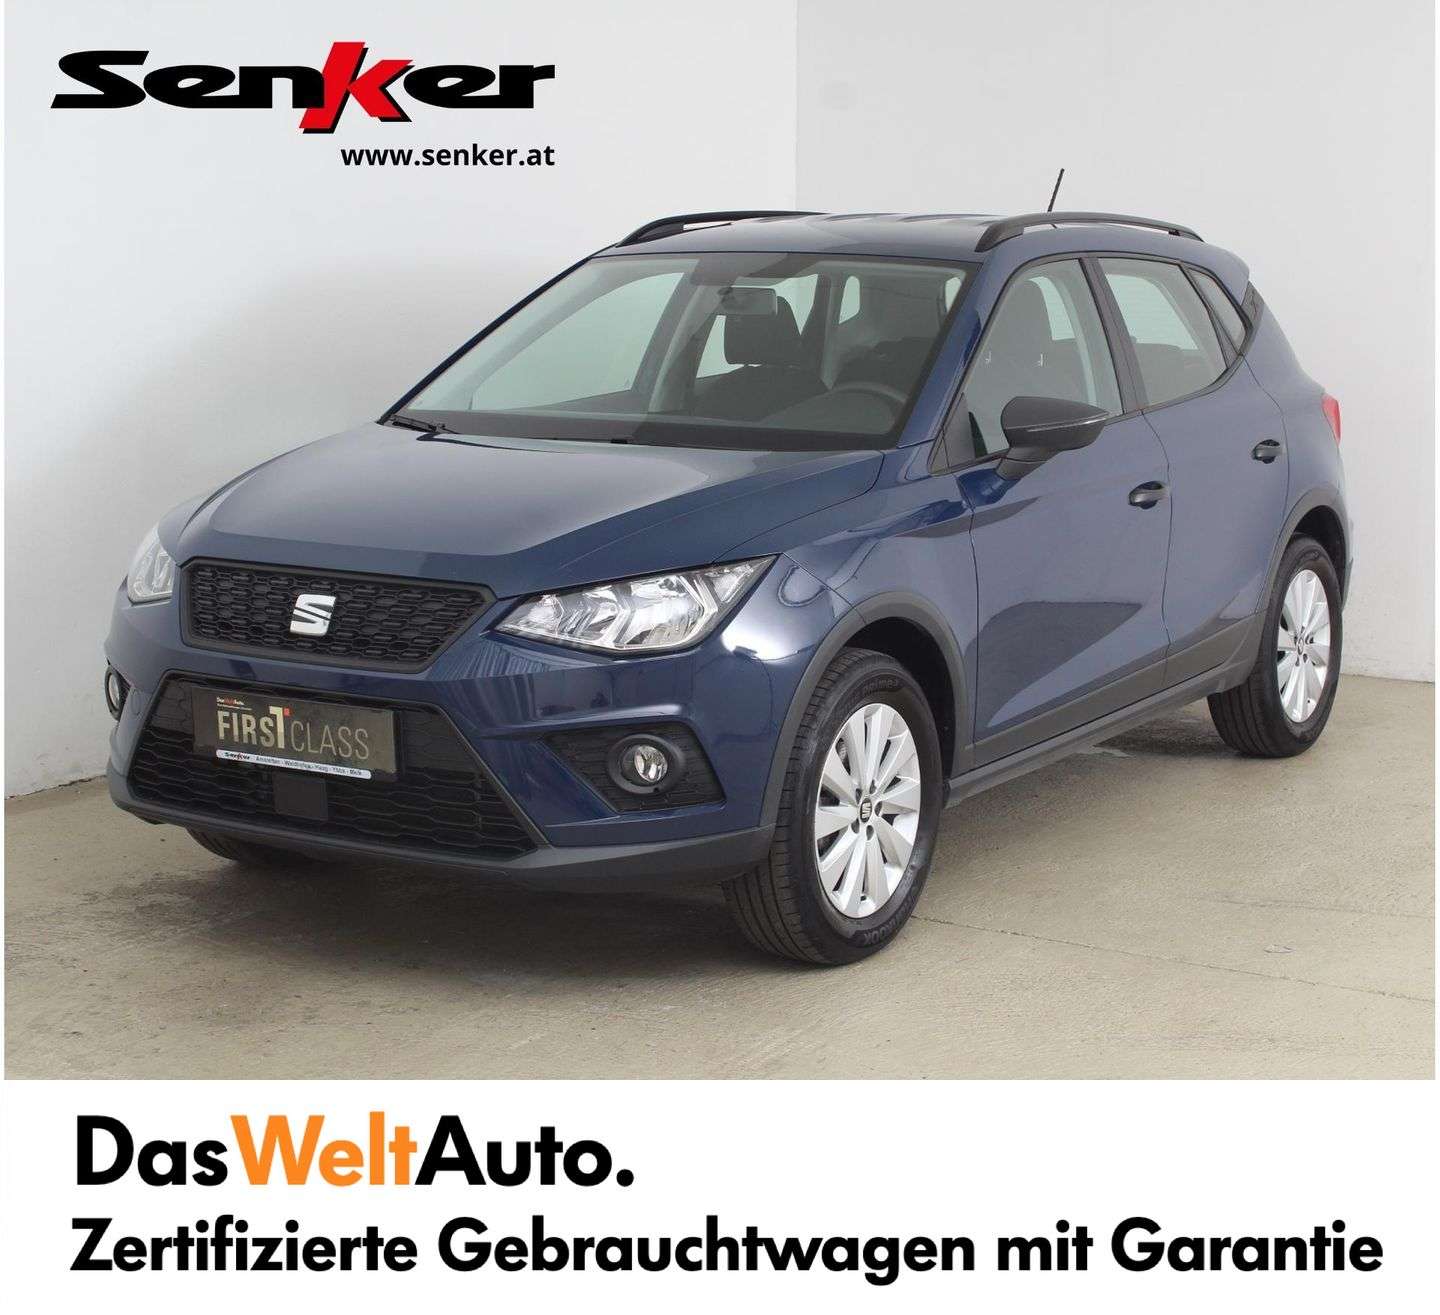 SEAT Arona Off-Road/Pick-up in Blue used in Ybbs an der Donau for € 14,990.-